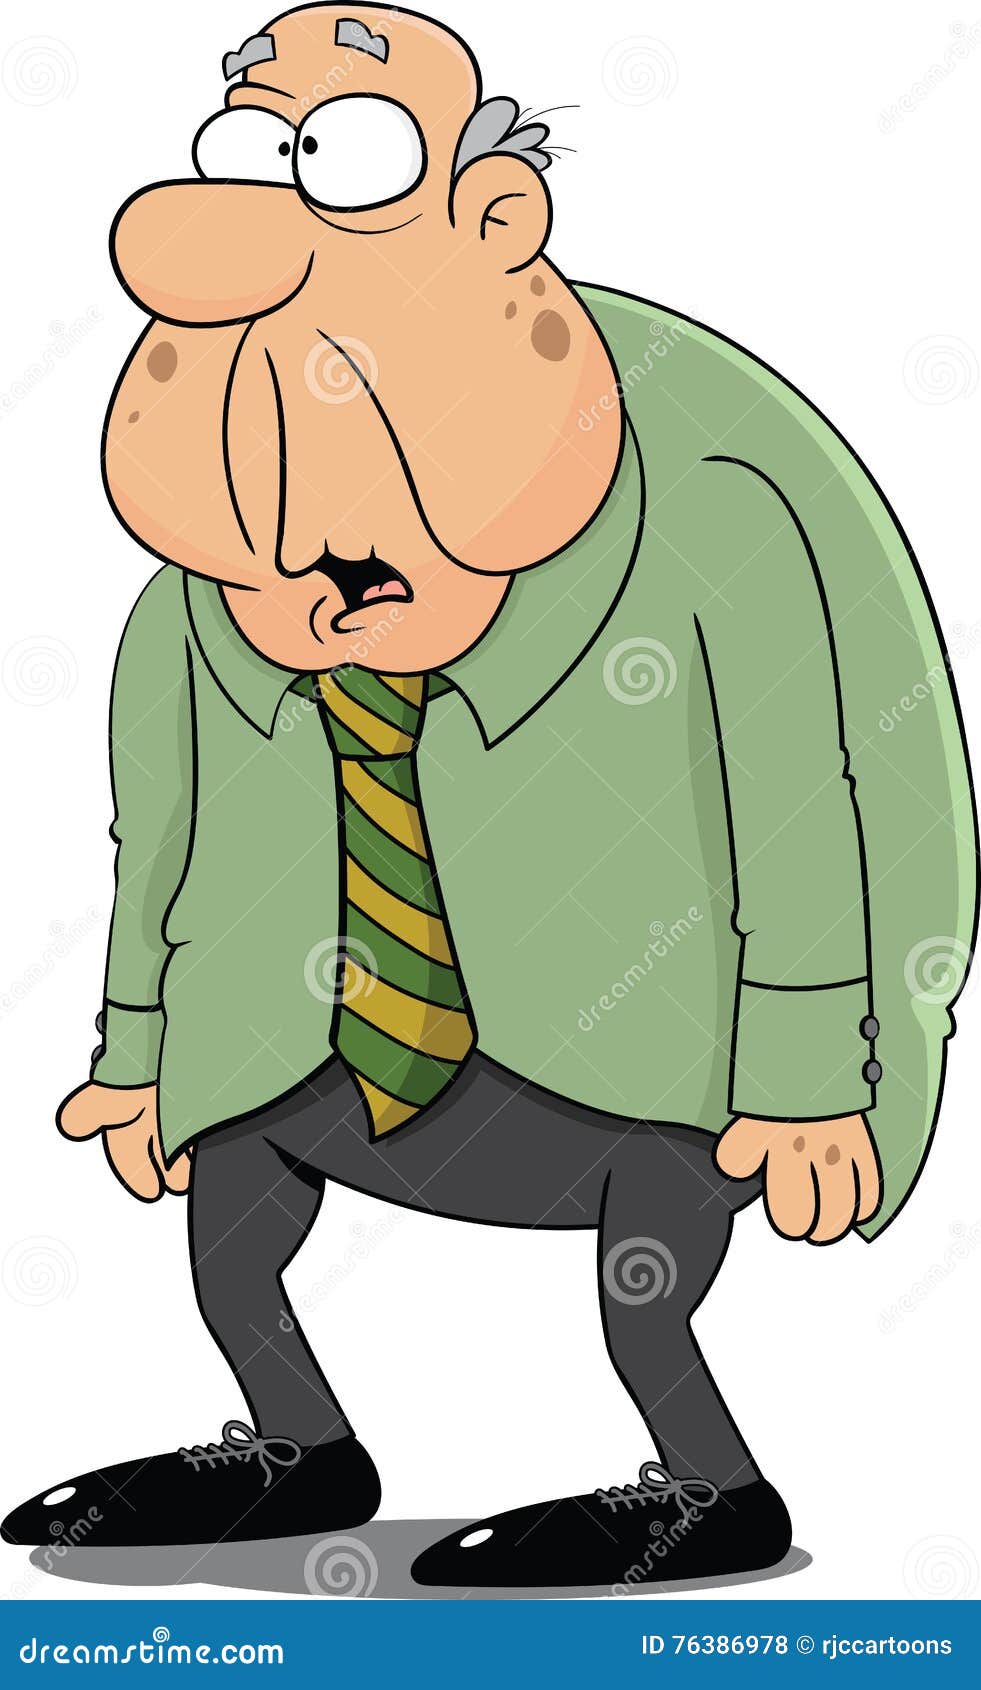 Cartoon Old Man Confused stock vector. Illustration of confused - 76386978